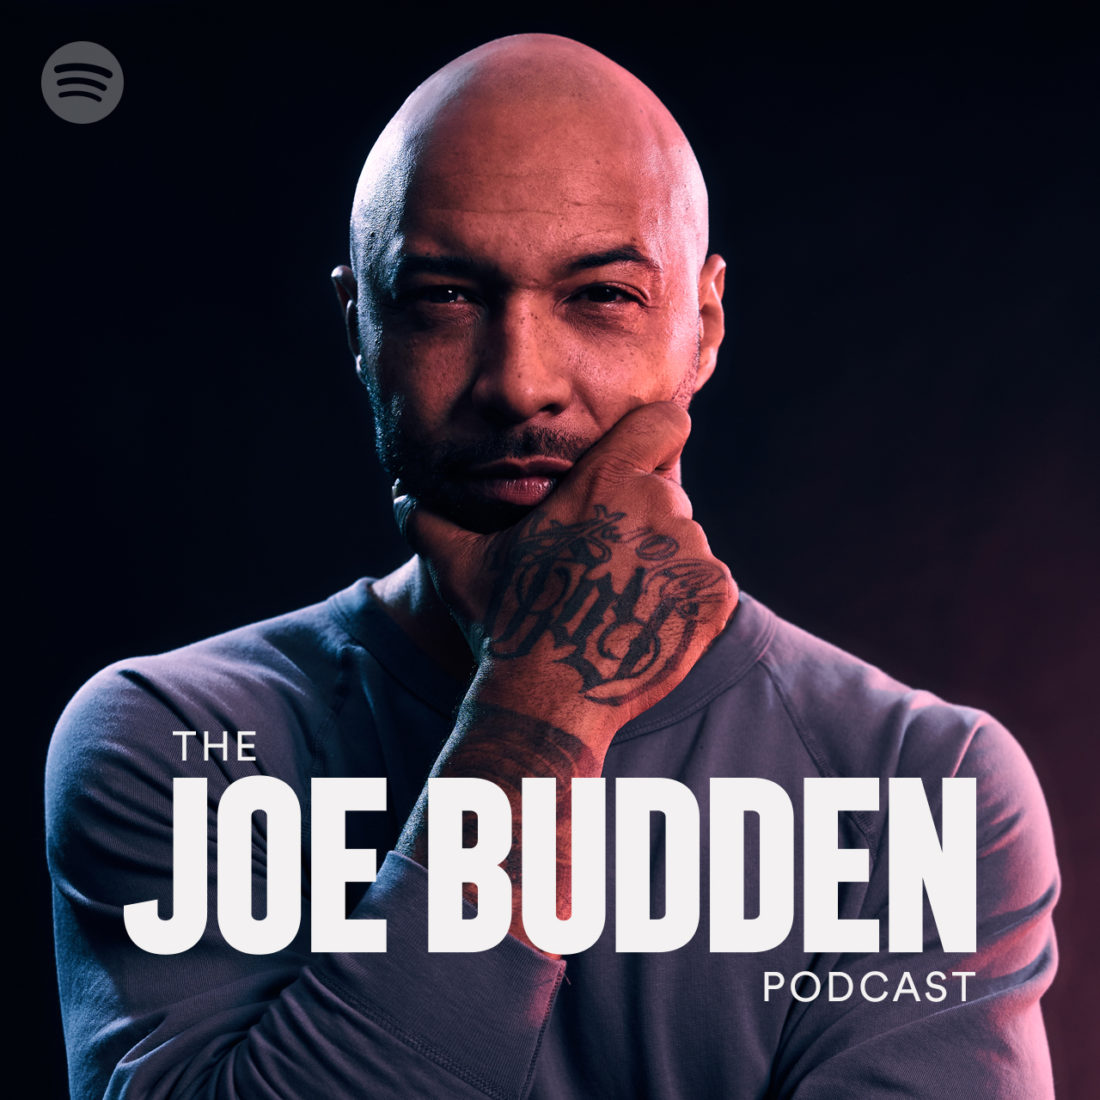 'The Joe Budden Podcast' Lands Exclusive Partnership with Spotify — Spotify